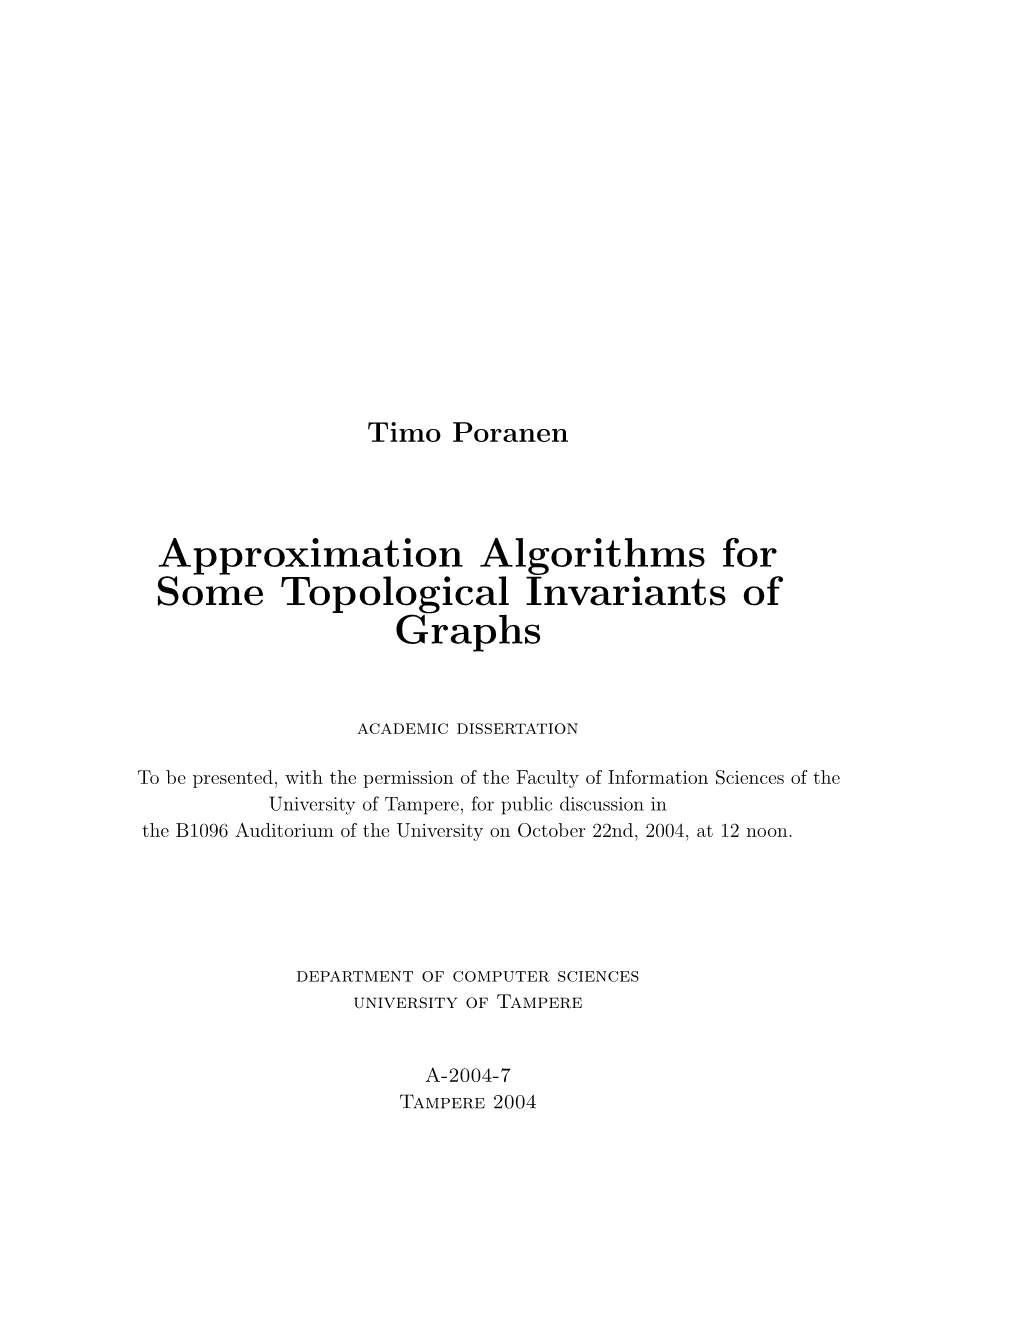 Approximation Algorithms for Some Topological Invariants of Graphs